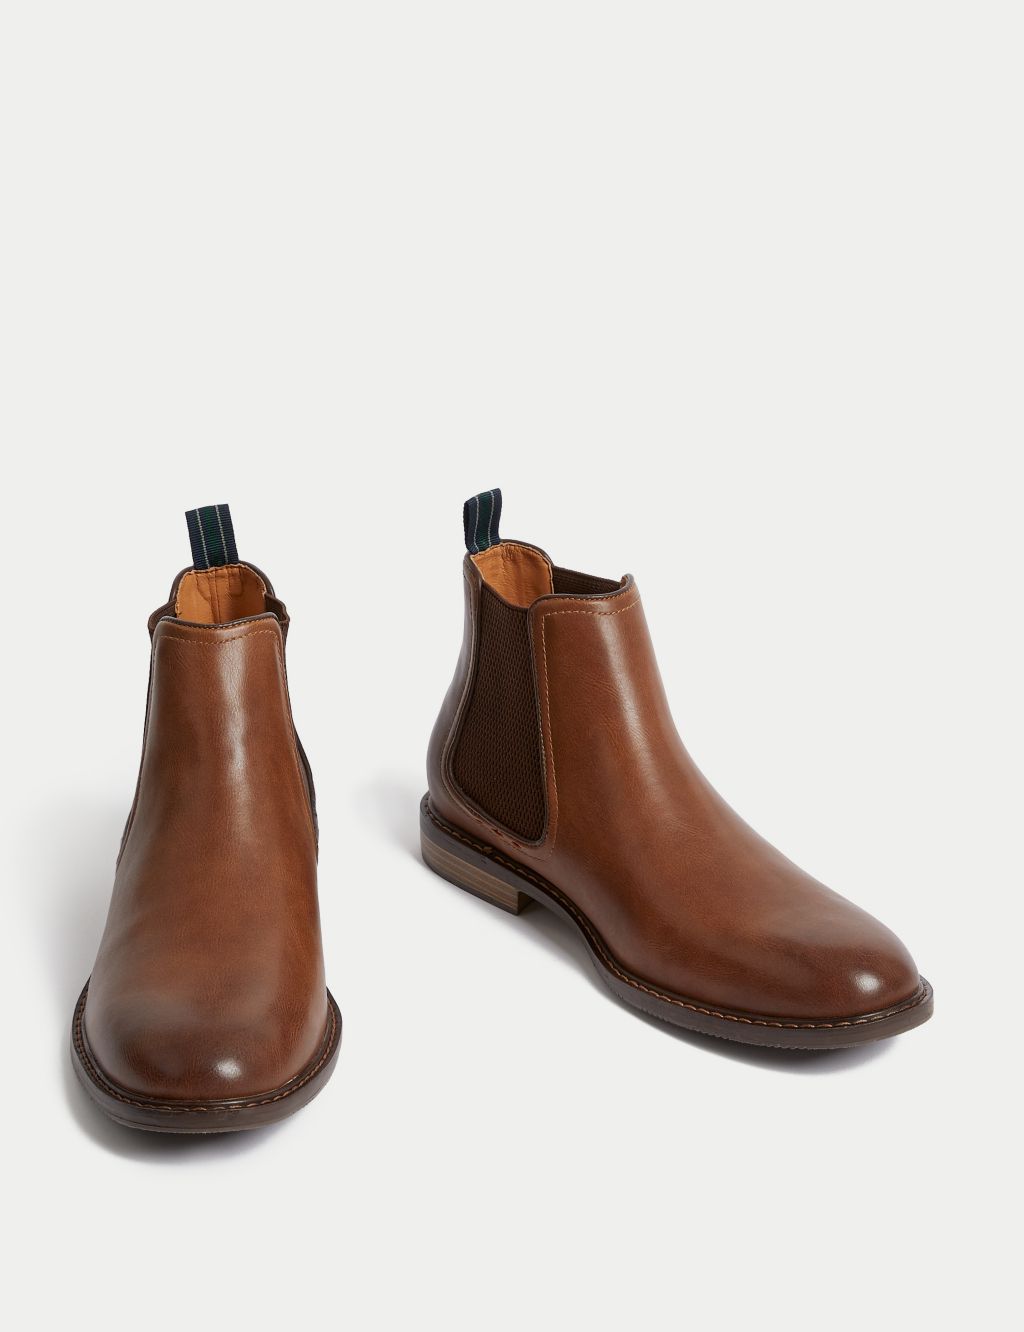 Pull-On Chelsea Boots image 2